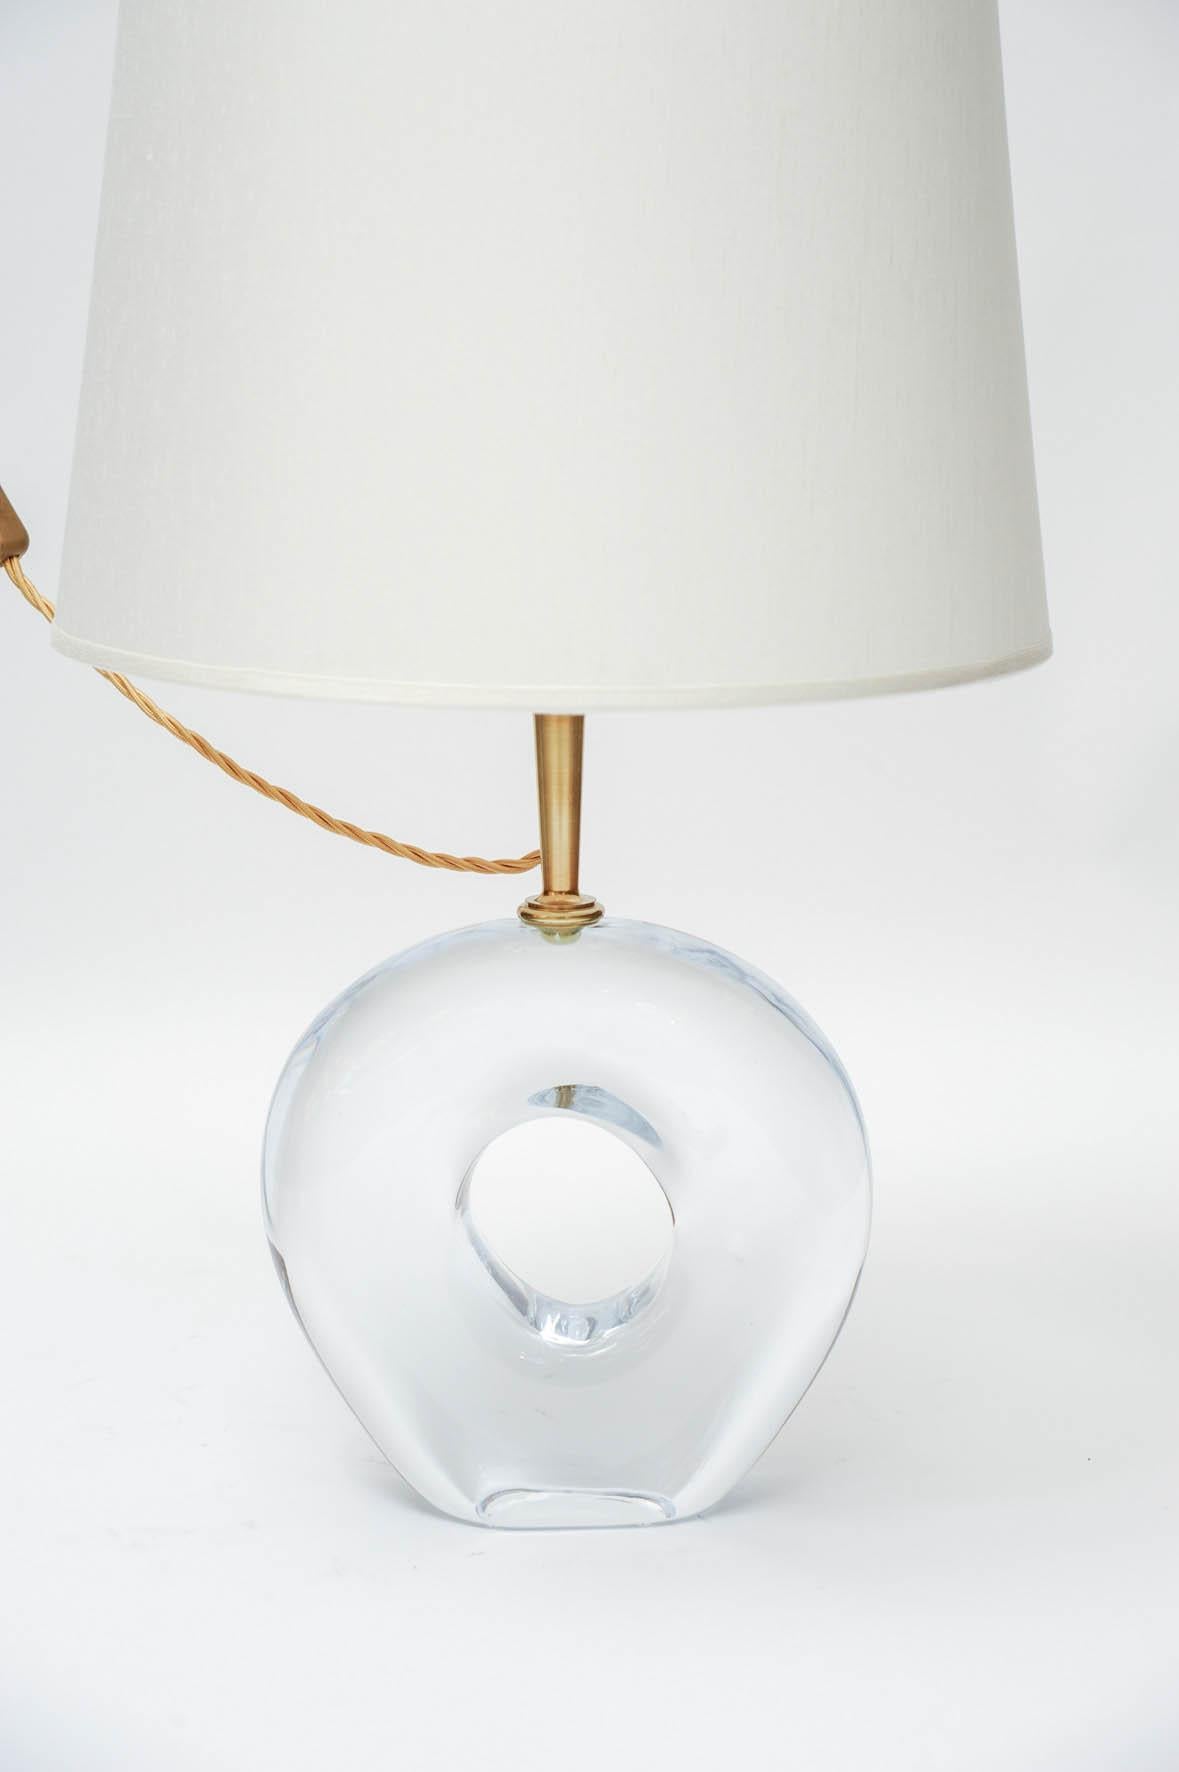 Unique pair of table lamps called Aura by the famous edition house Esperia, made for Glustin Luminaires.

Massive and thick Murano glass piece topped with a brass neck holding the light socket.